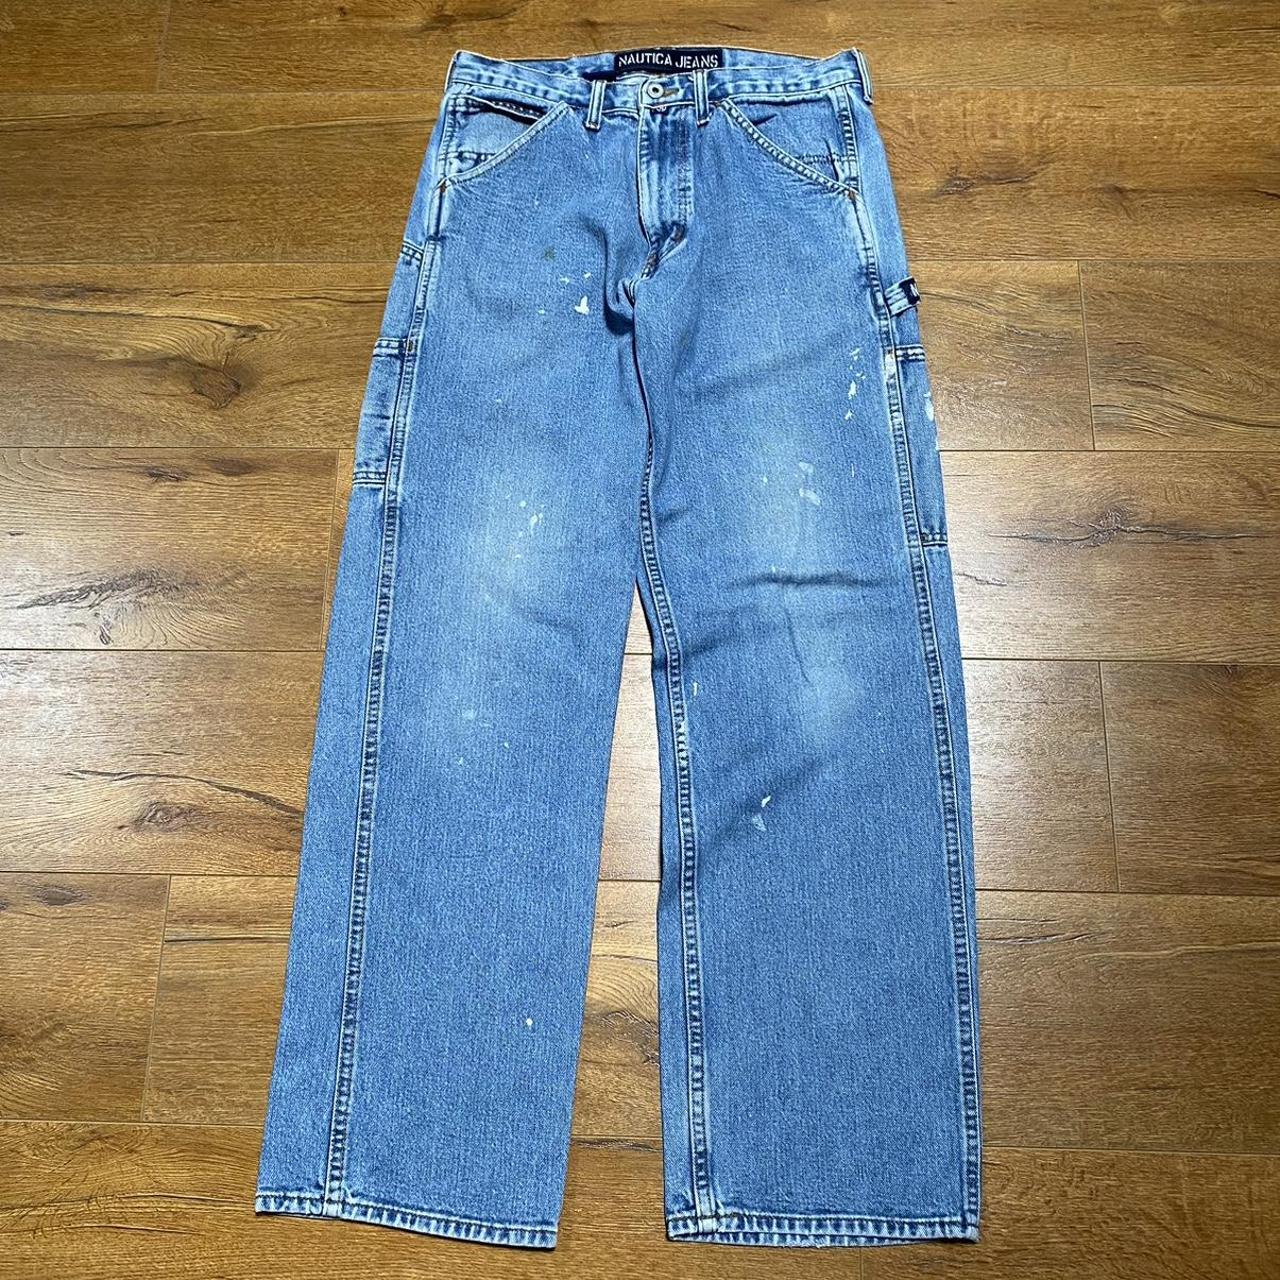 Men's Blue and White Jeans | Depop